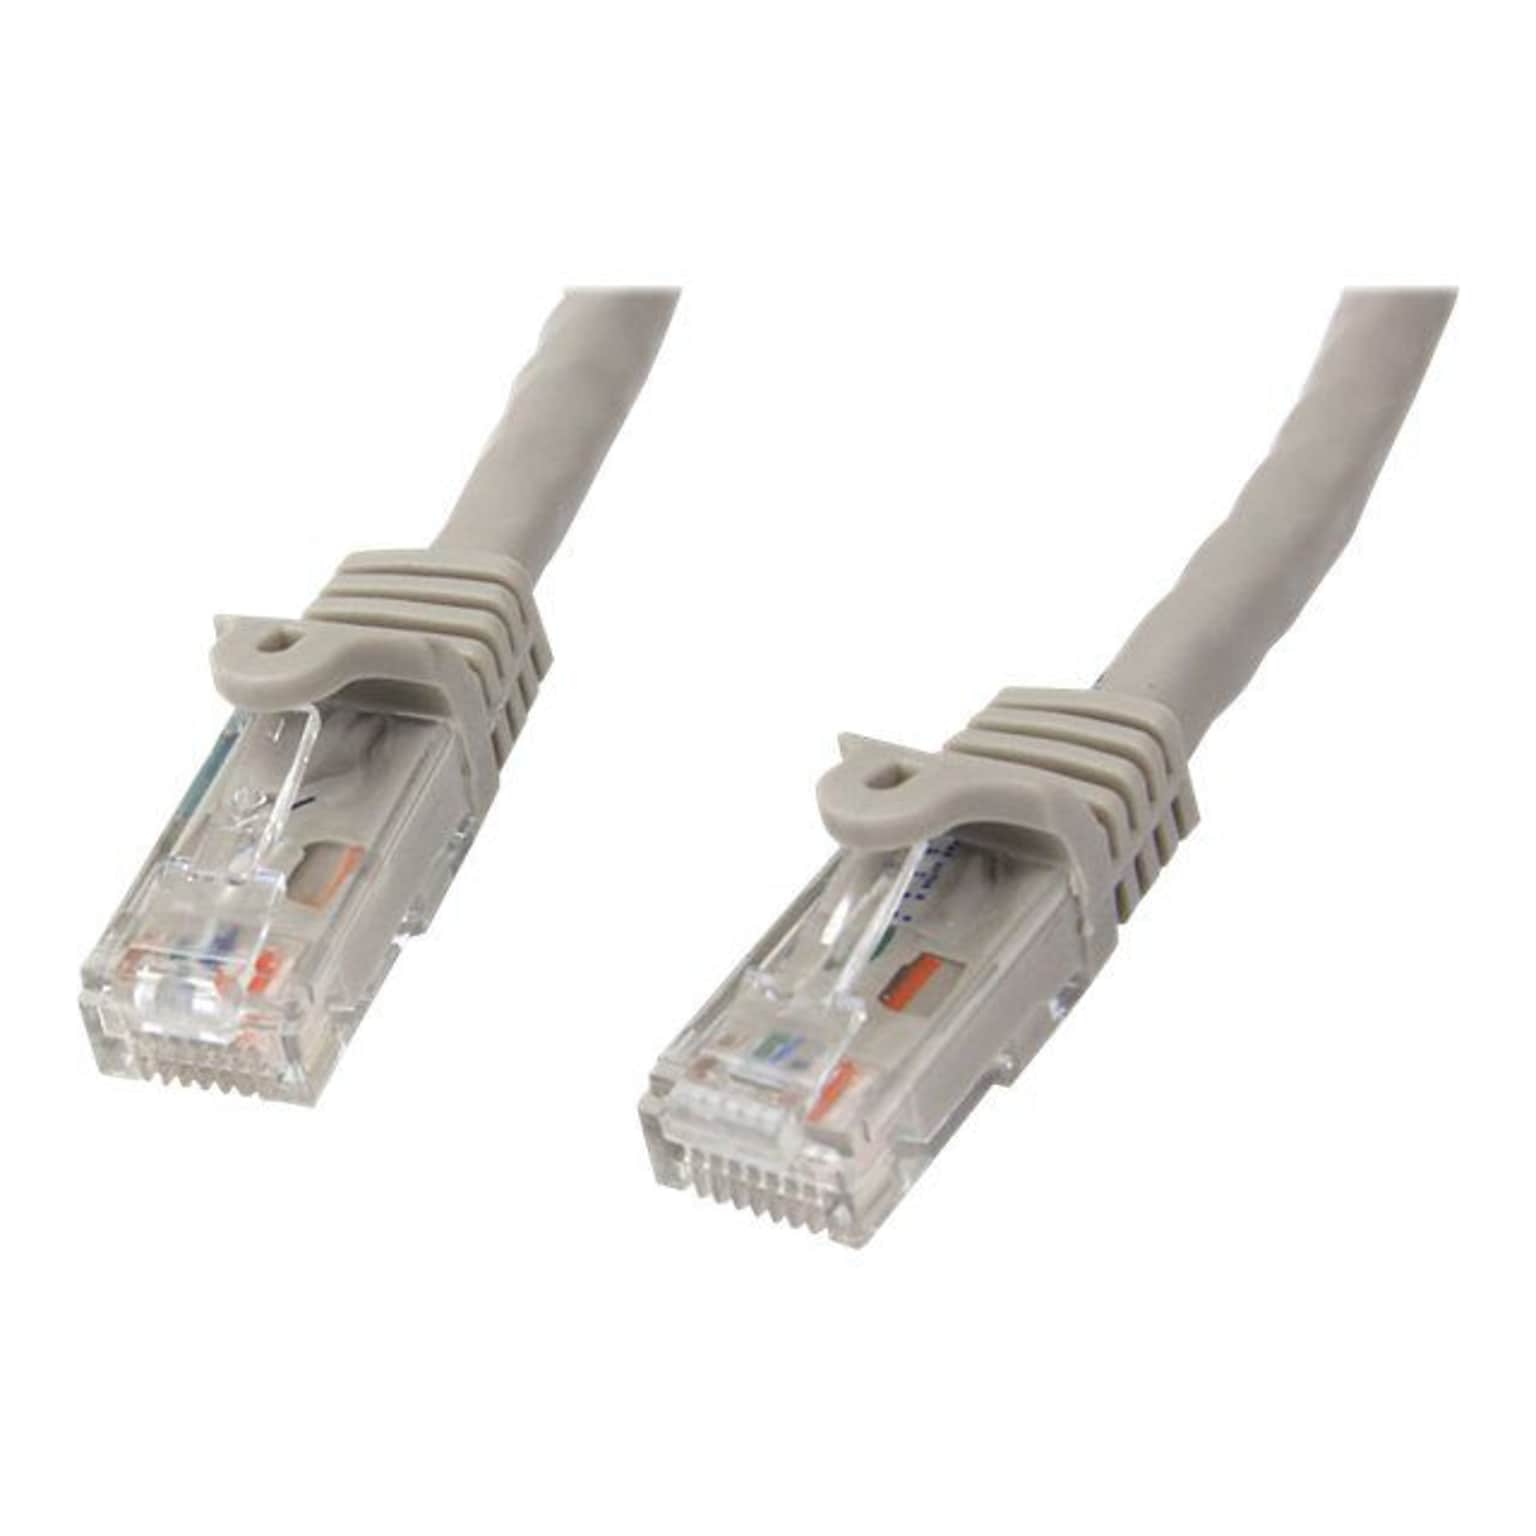 StarTech N6PATCH10GR Cat6 Patch Cable with Snagless RJ45 Connectors; 10ft, Gray